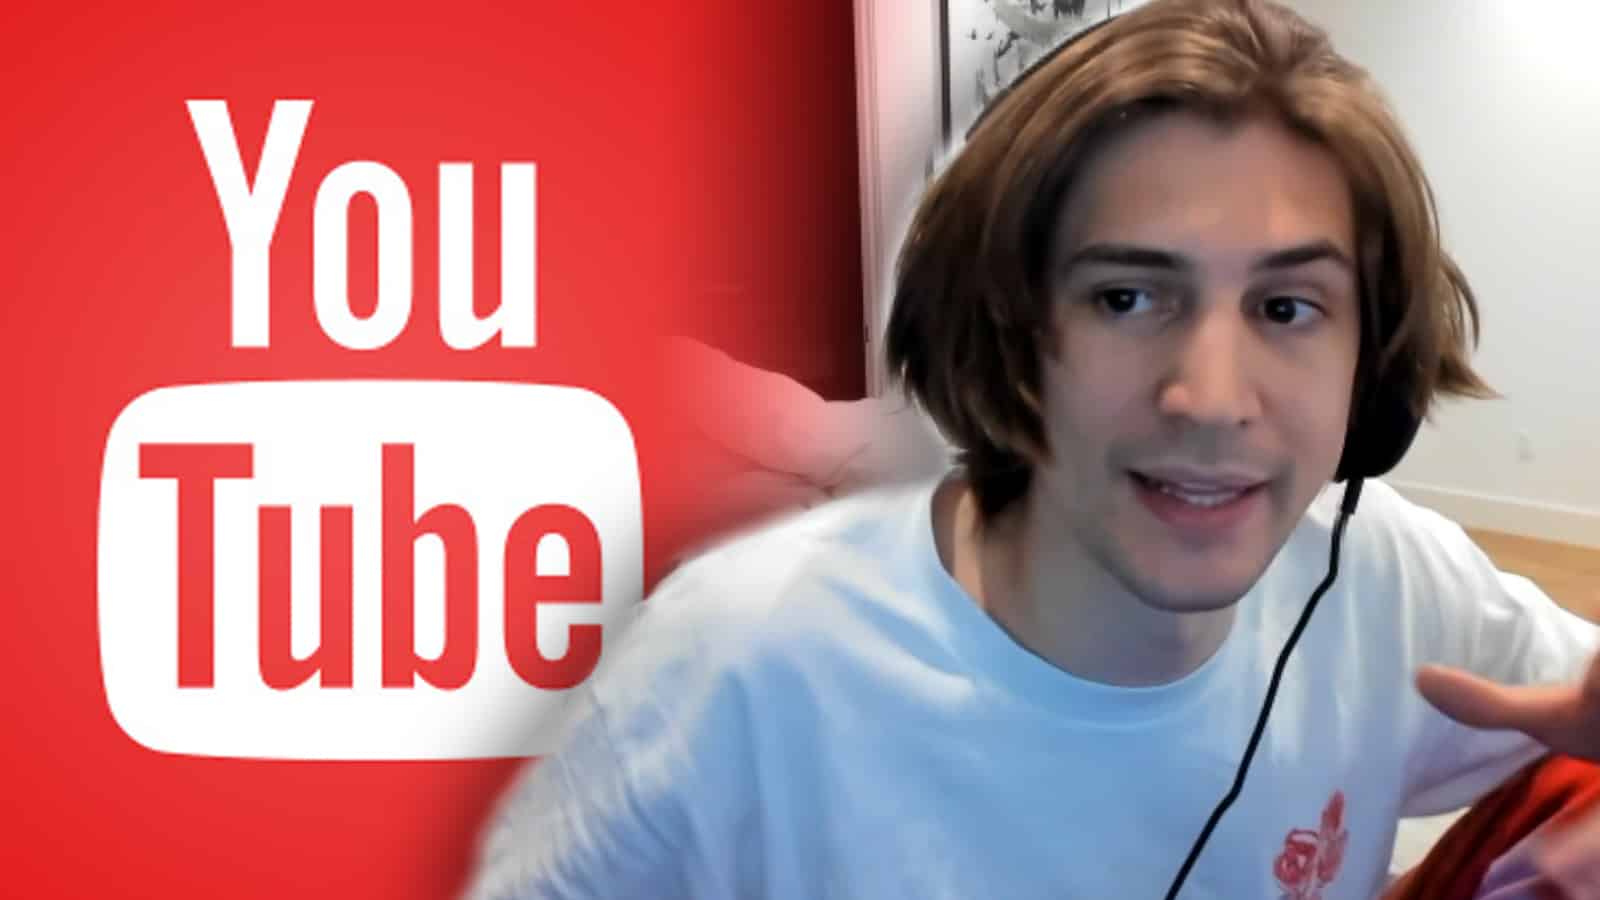 xQc on Twitch looking at YouTube logo.